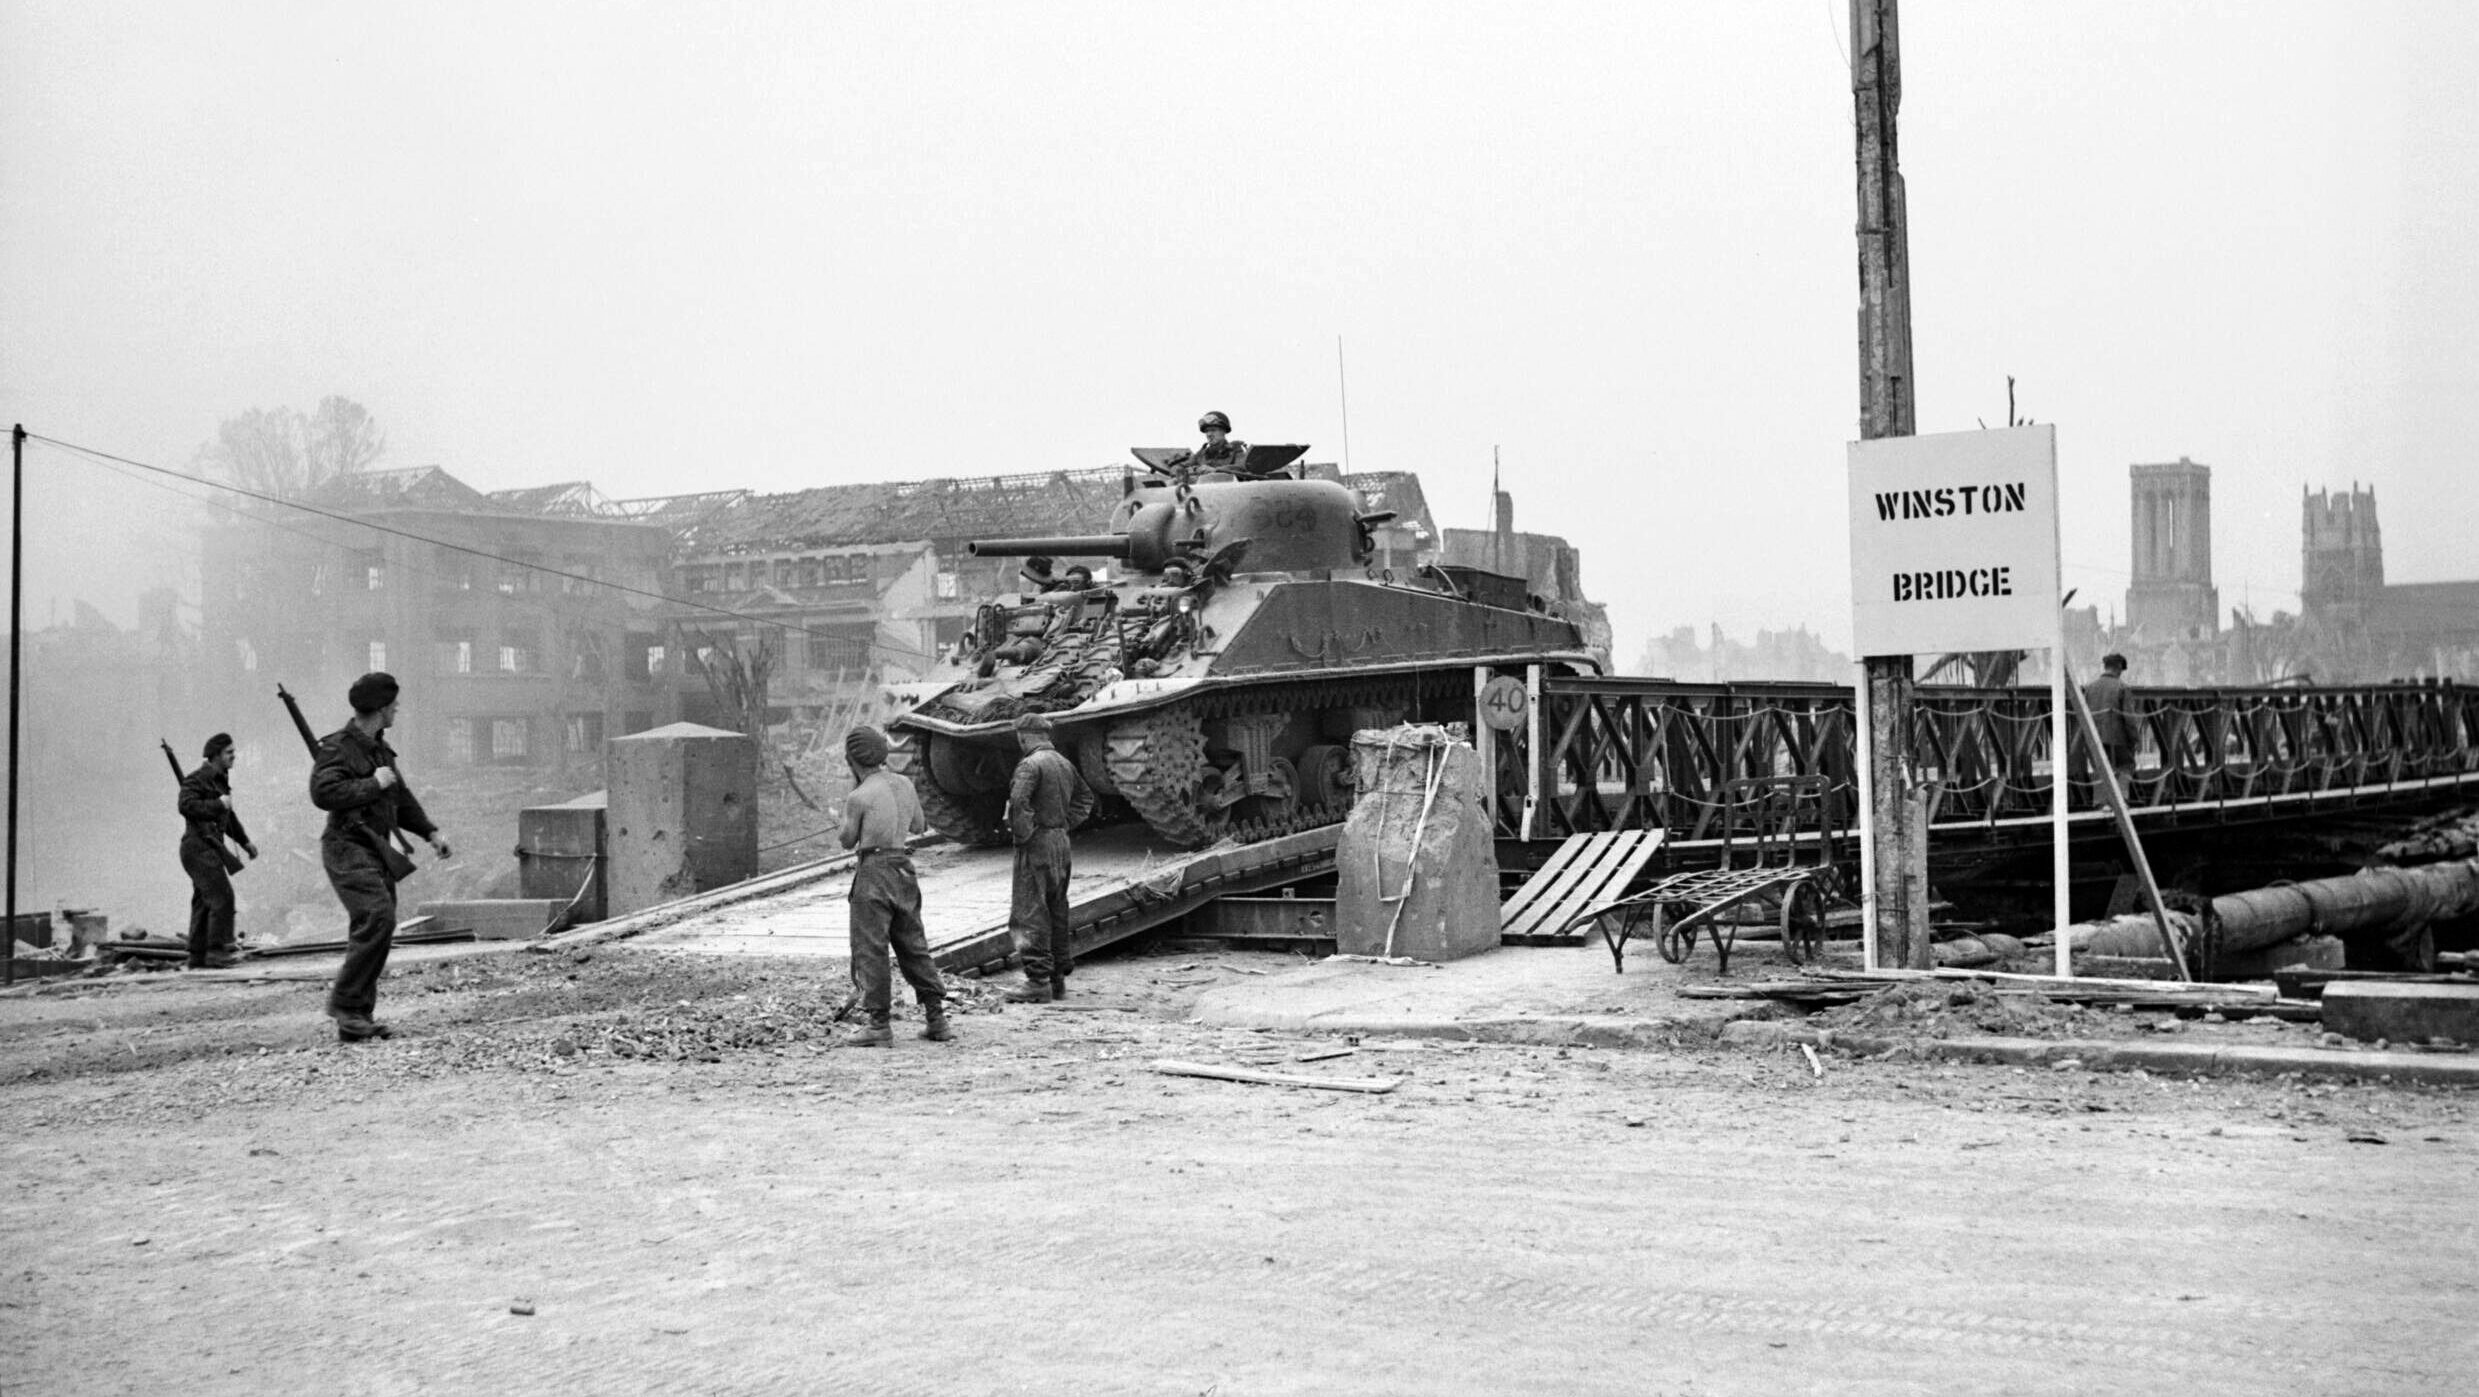 A Sherman tank successfully crosses Winston Bridge, a British Bailey bridge erected across the Orne River in preparation for the Operation Goodwood offensive. After weeks of fighting, Caen was finally secured, and both the Allies and the Germans had paid a high price.